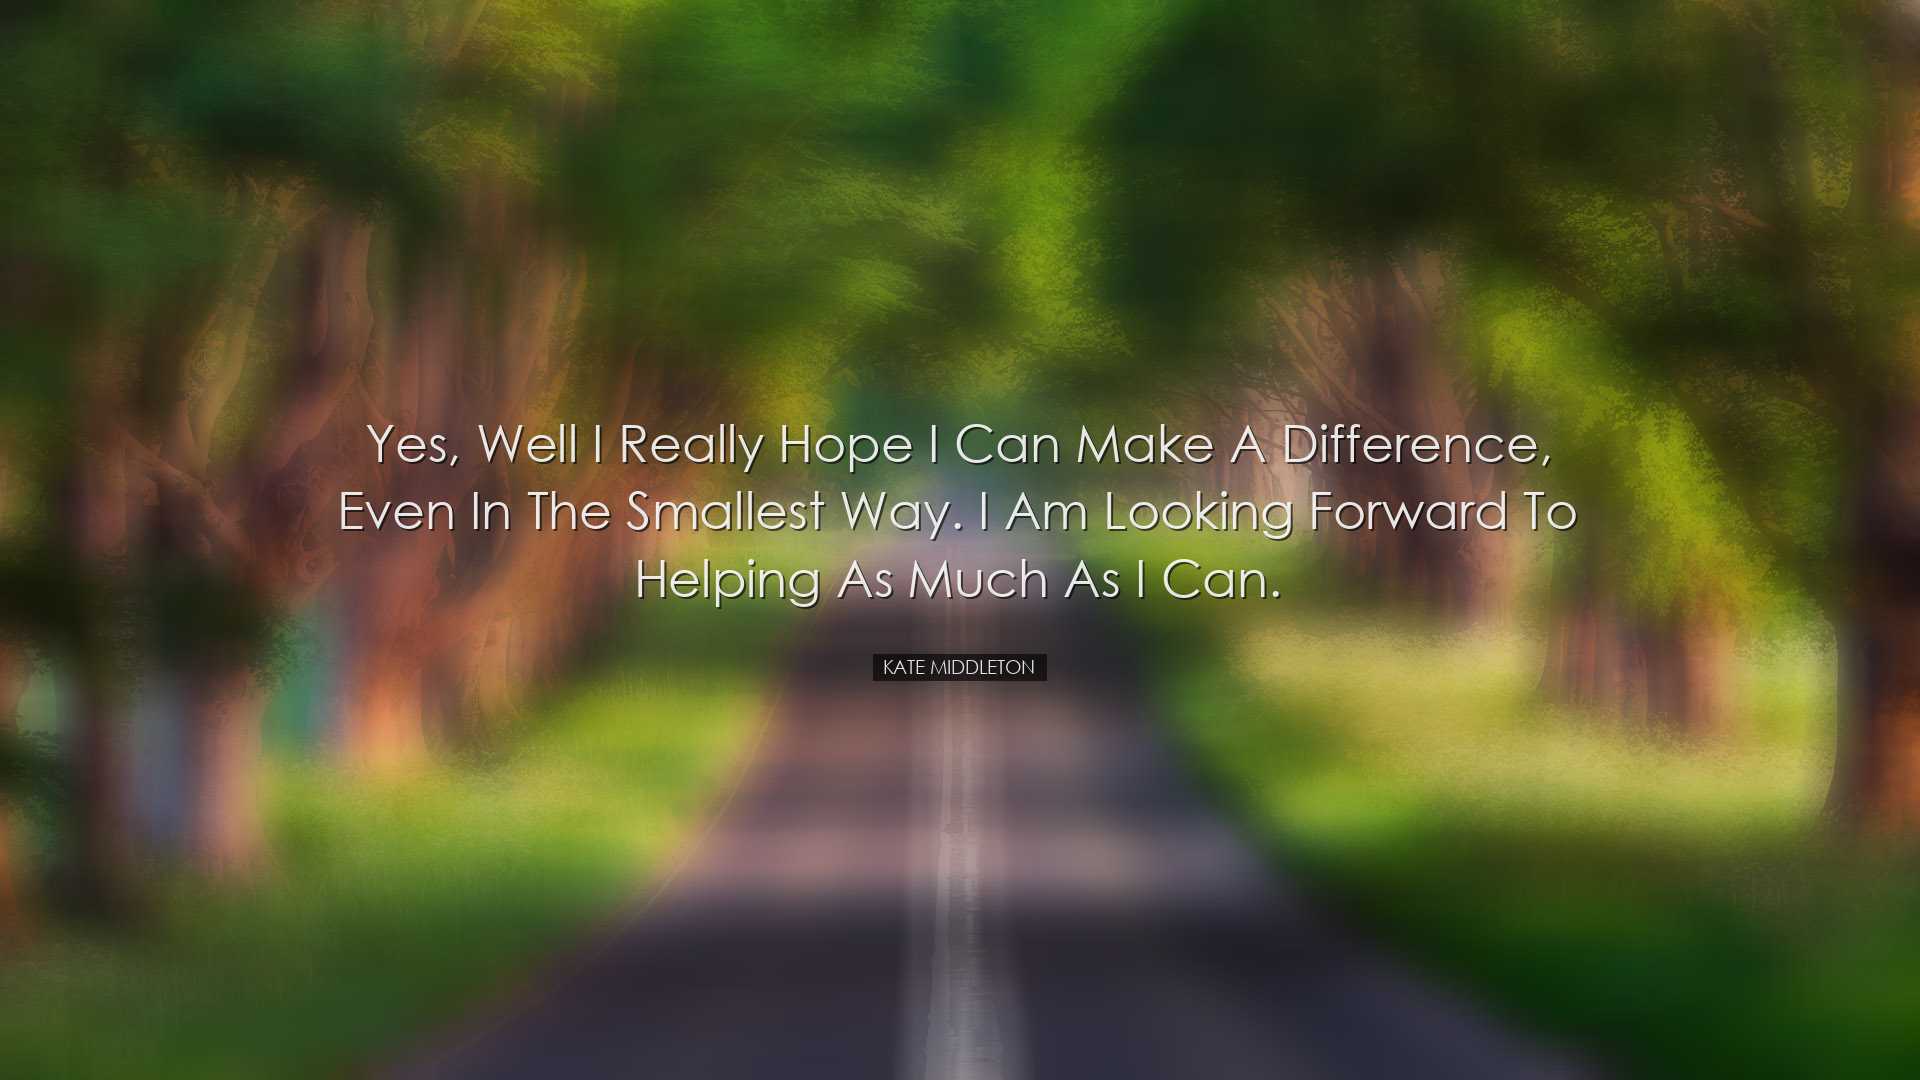 Yes, well I really hope I can make a difference, even in the small